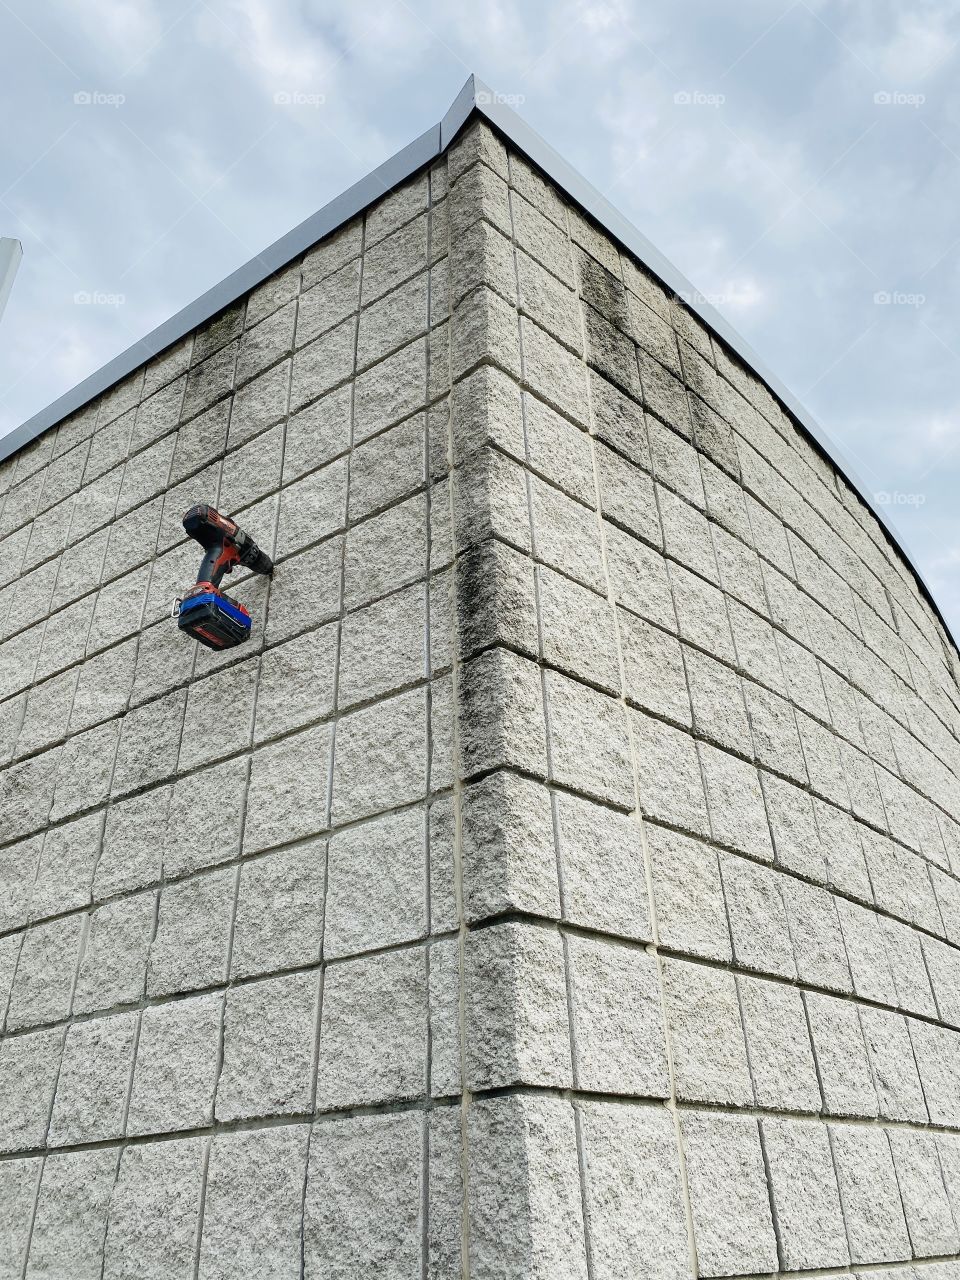 A drill left hanging from a concrete building